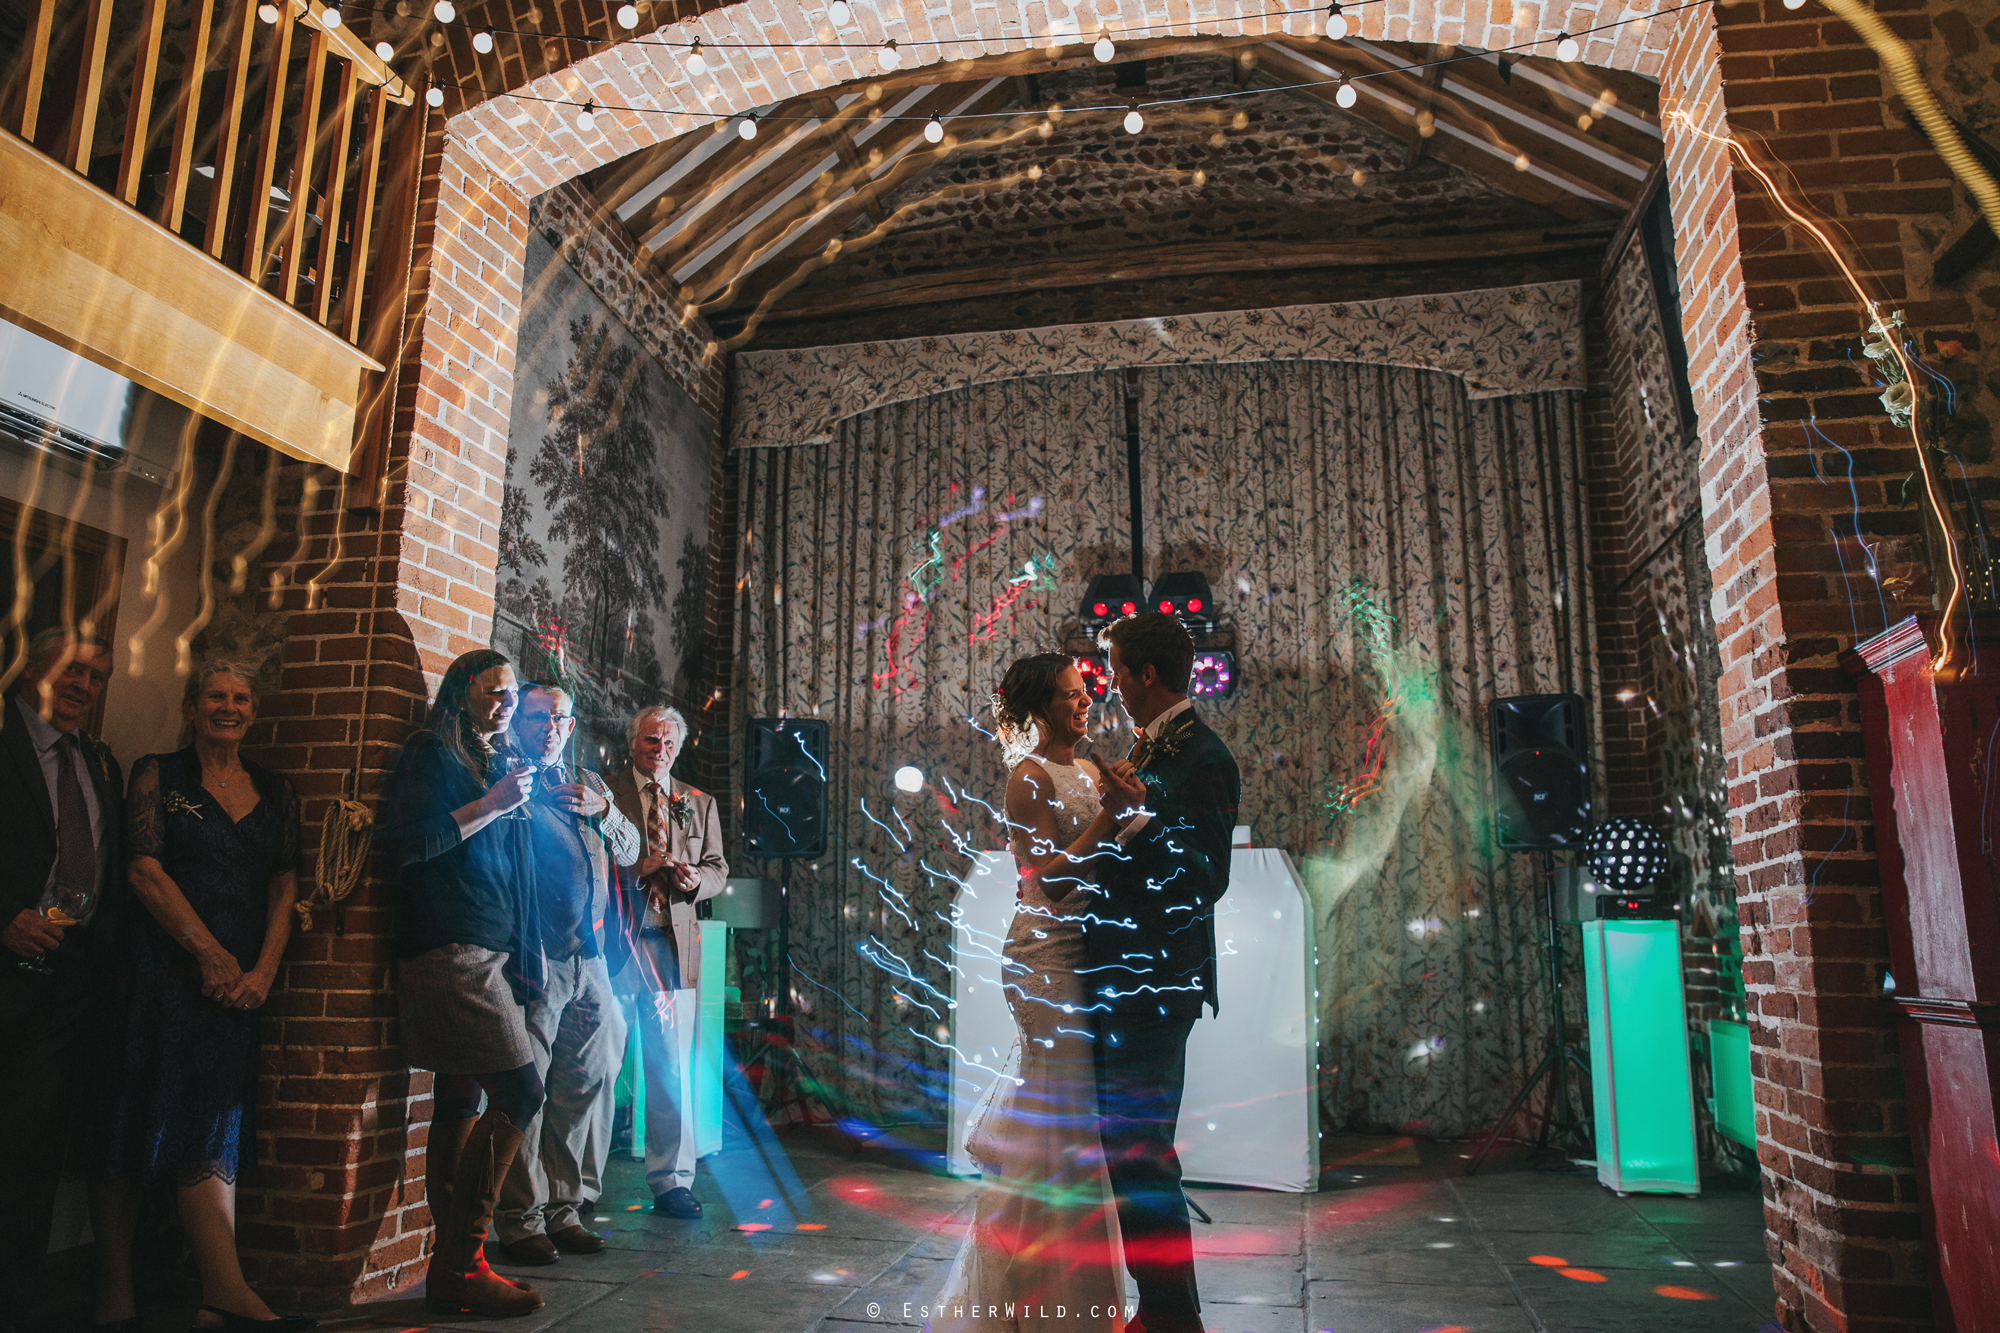 Wedding_Photographer_Chaucer_Barn_Holt_Norfolk_Country_Rustic_Venue_Copyright_Esther_Wild_IMG_2417.jpg